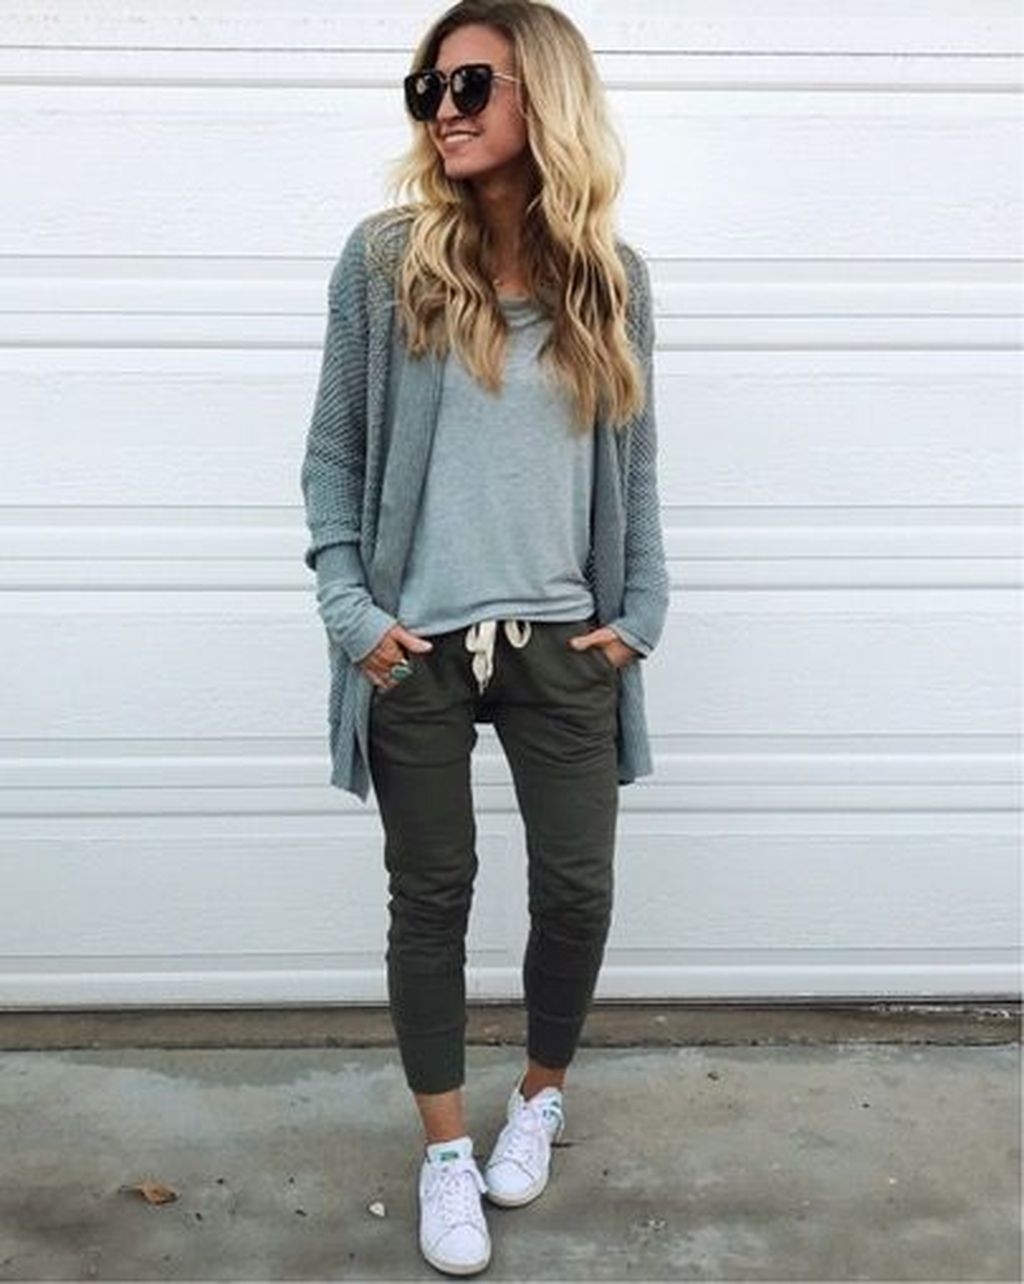 35 Trending Fall Outfits Ideas To Get Inspire